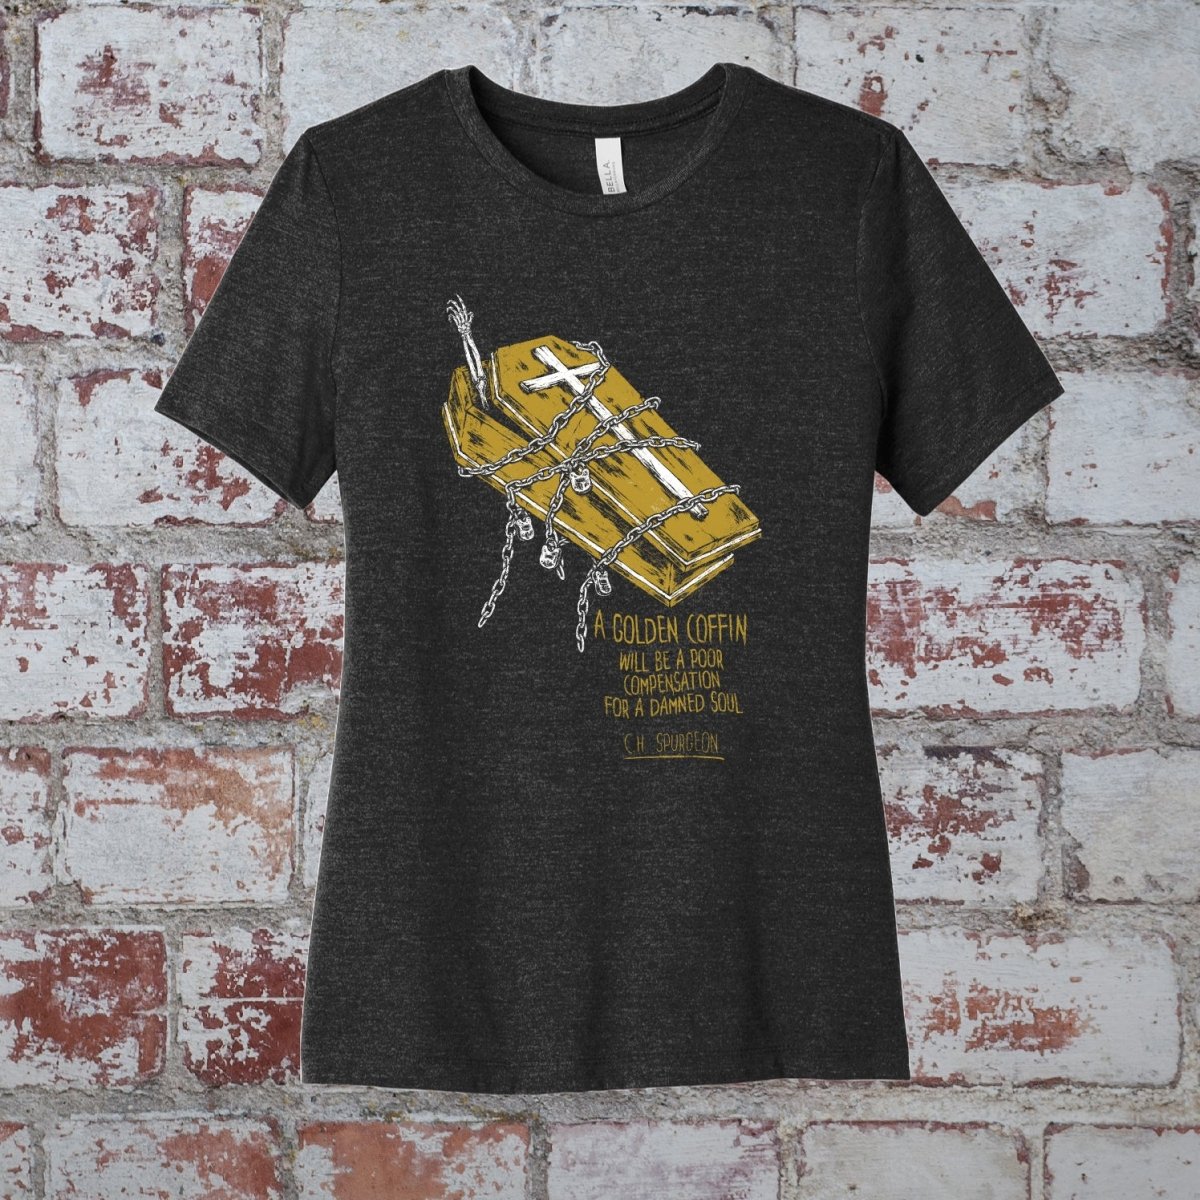 wshirt - Golden Coffin - Womens Tee - The Reformed Sage - #reformed# - #reformed_gifts# - #christian_gifts#